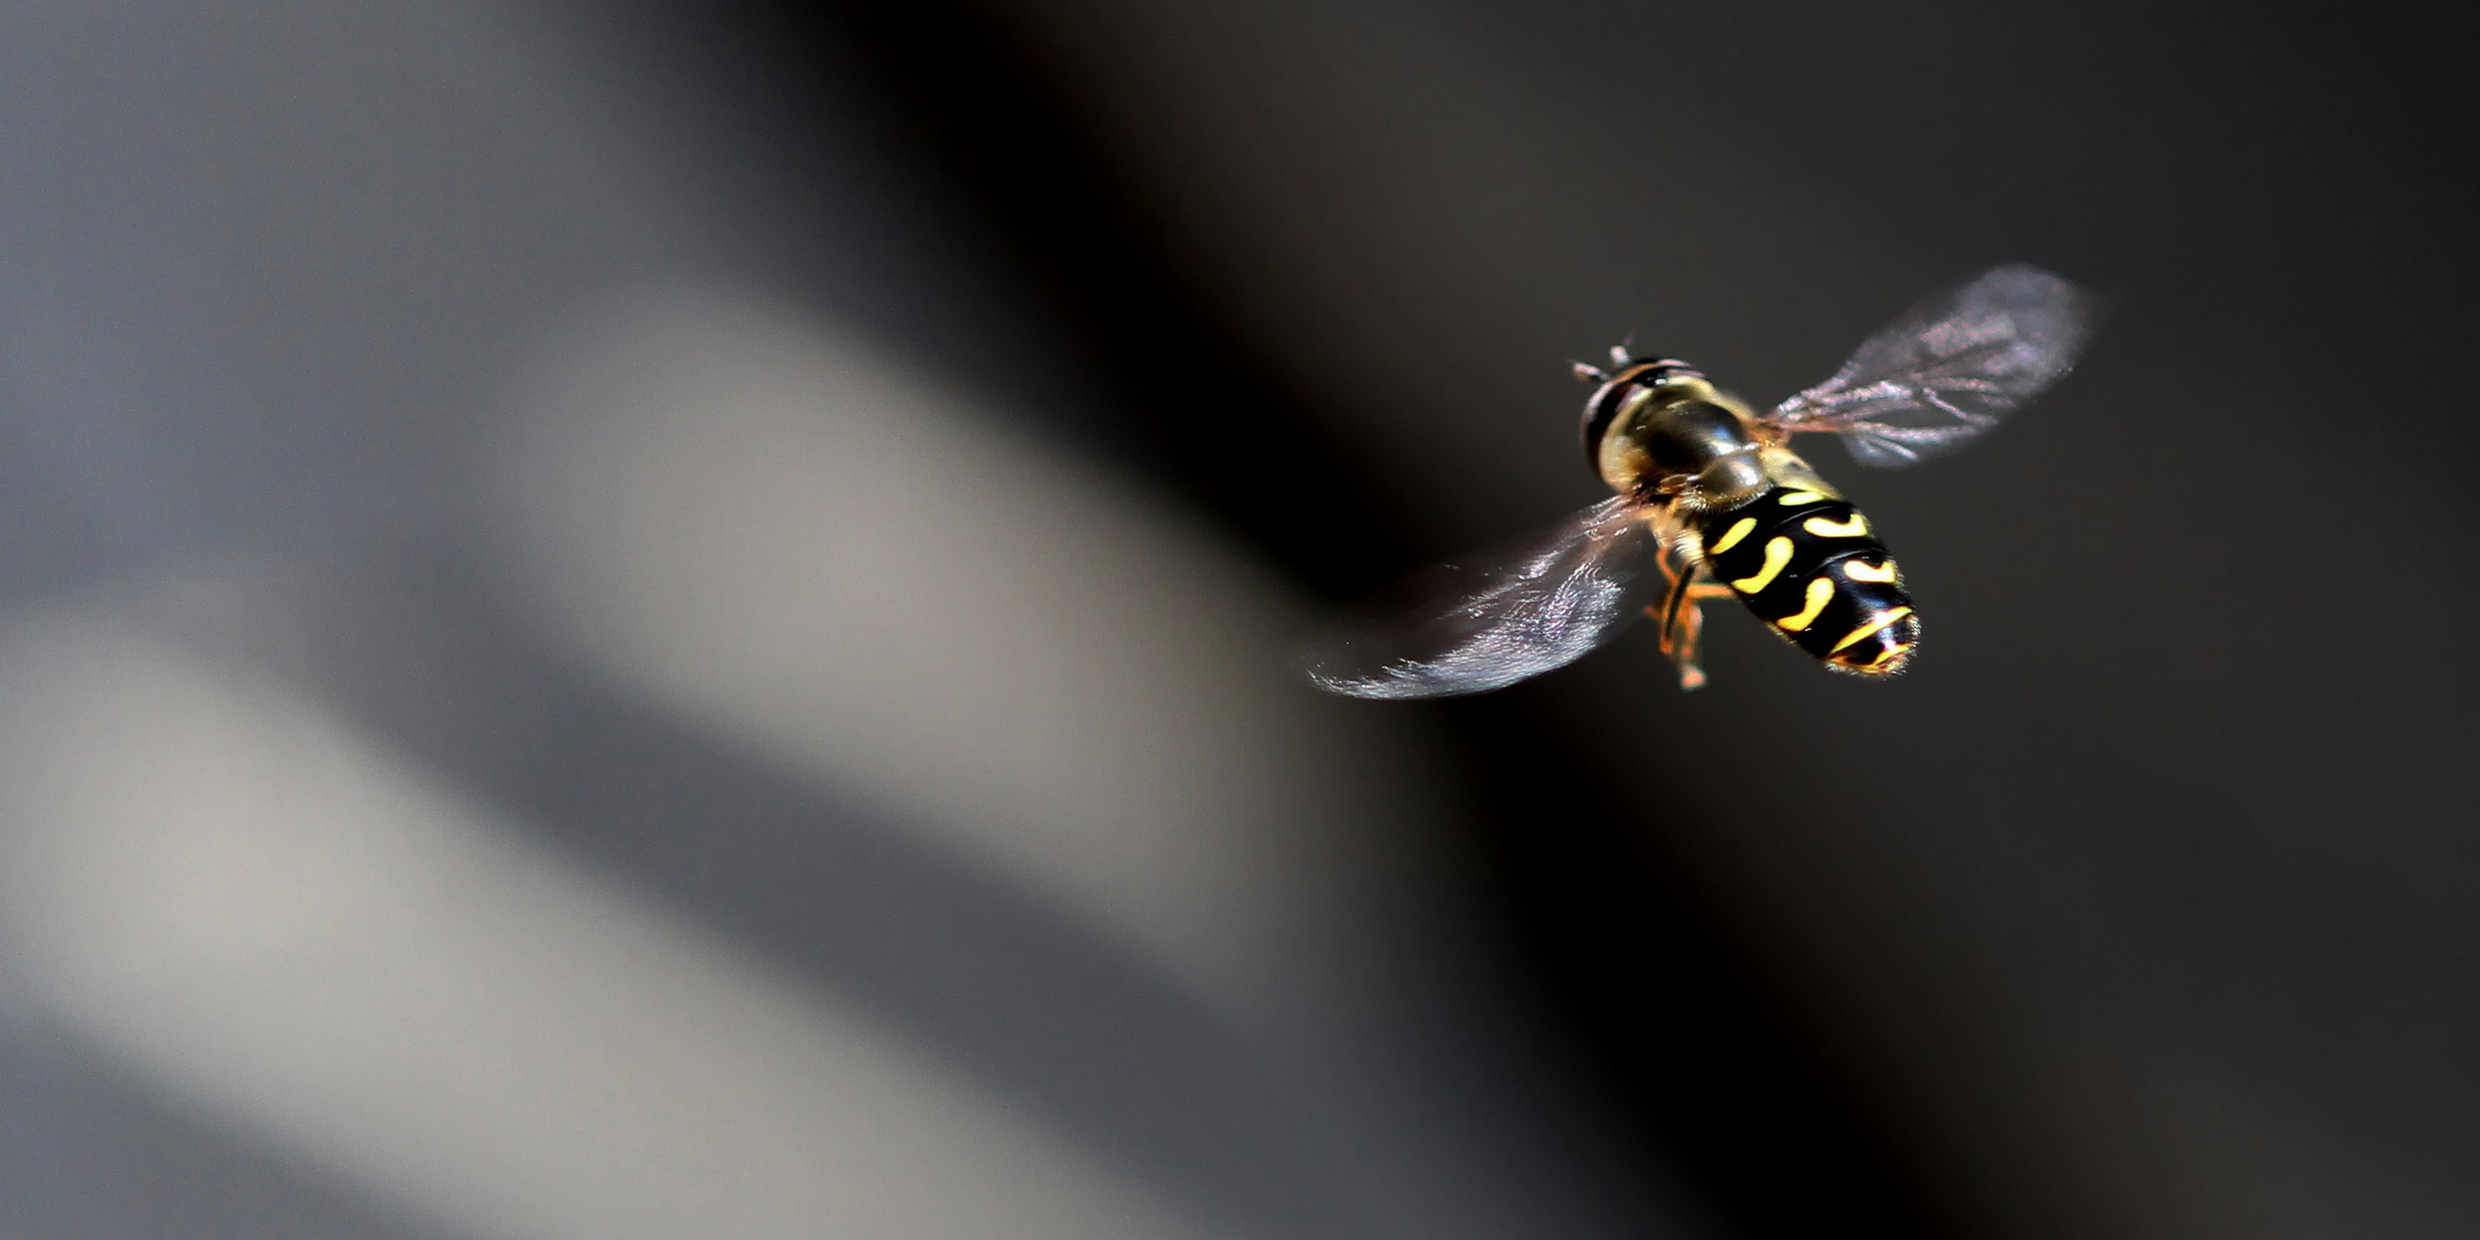 Image of a black and yellow insect in flight